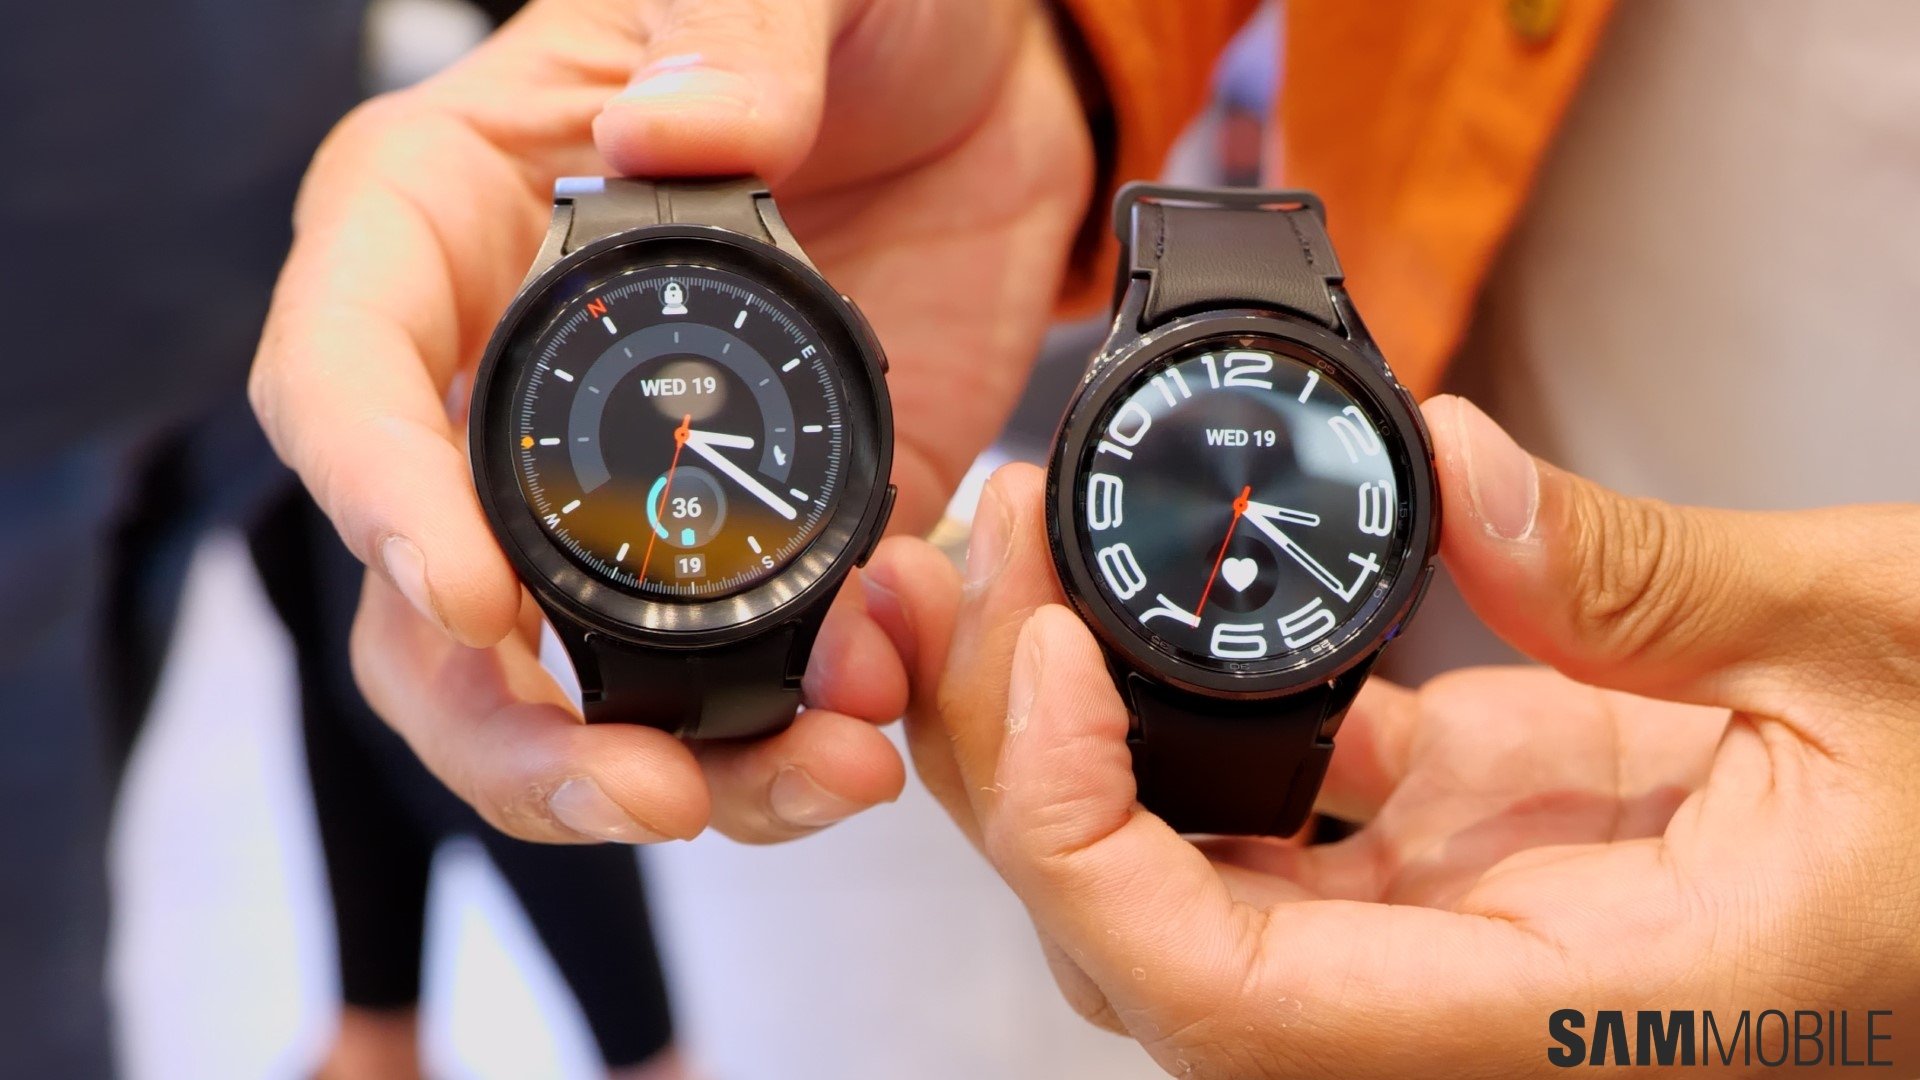 Samsung Galaxy Watch 5 Vs Samsung Galaxy Watch 5 Pro! (Comparison) (Review)  - YouTube